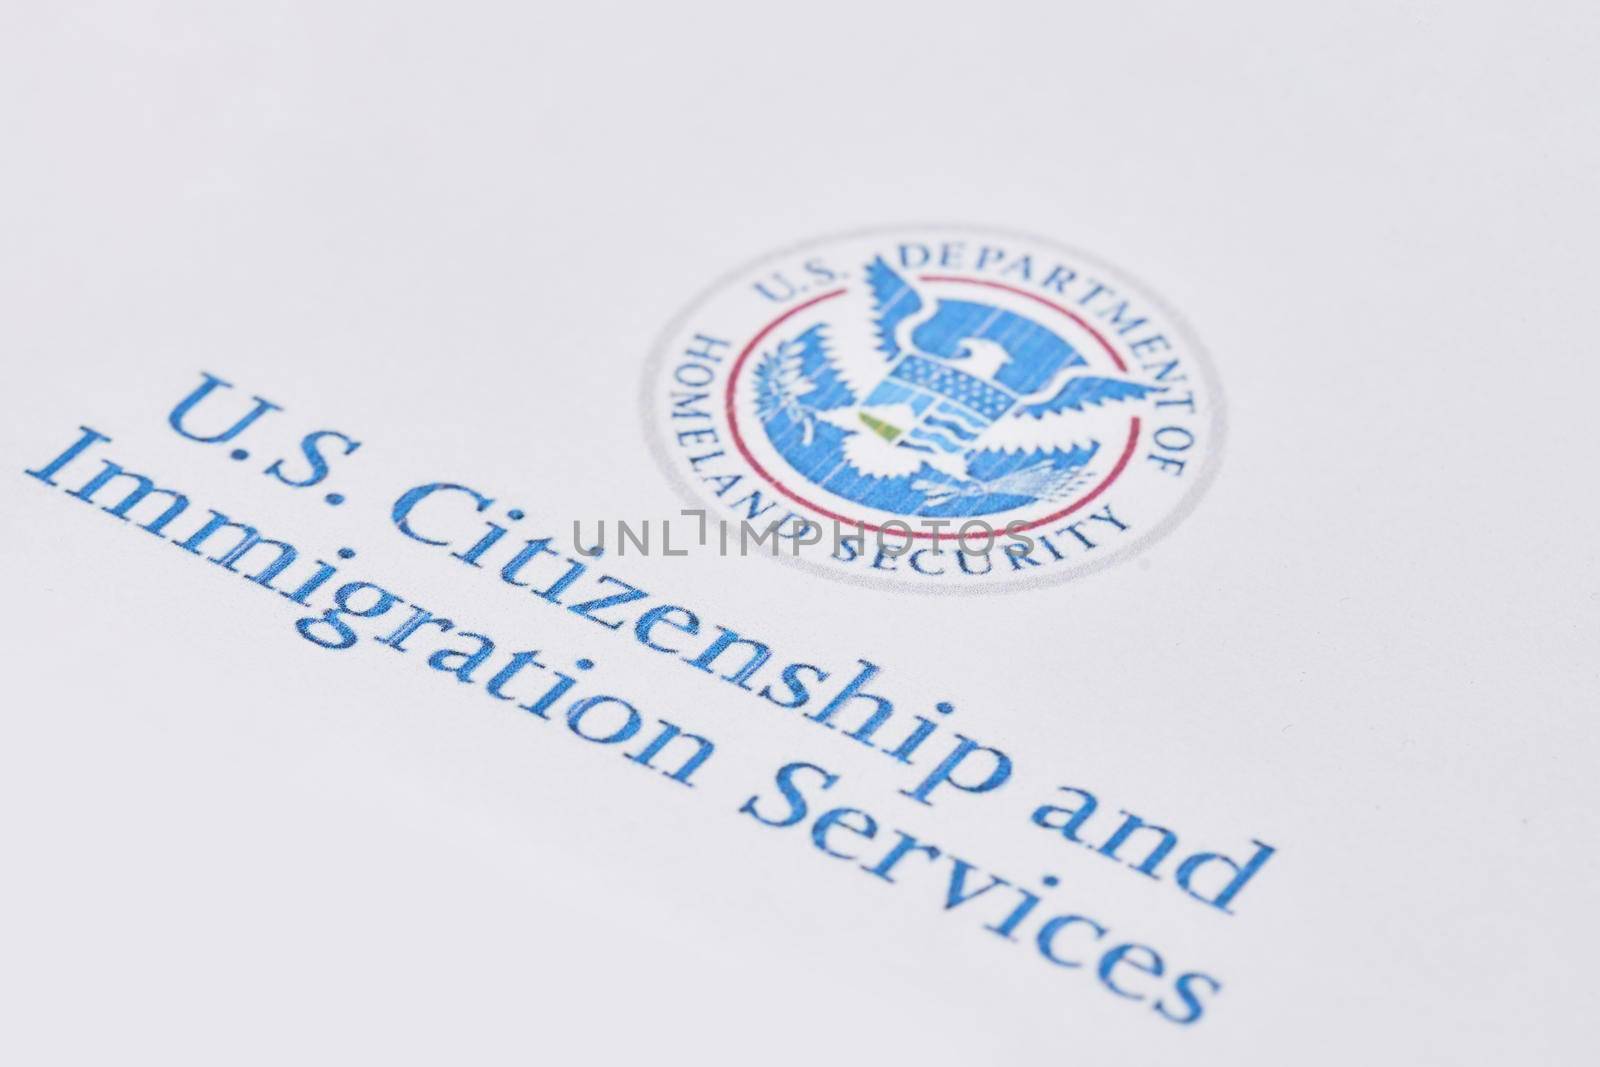 Tashkent, Uzbekistan - 13 August, 2021: United States Citizenship and Immigration Services. Envelopes with letter from USCIS on United States flag from Department of Homeland Security